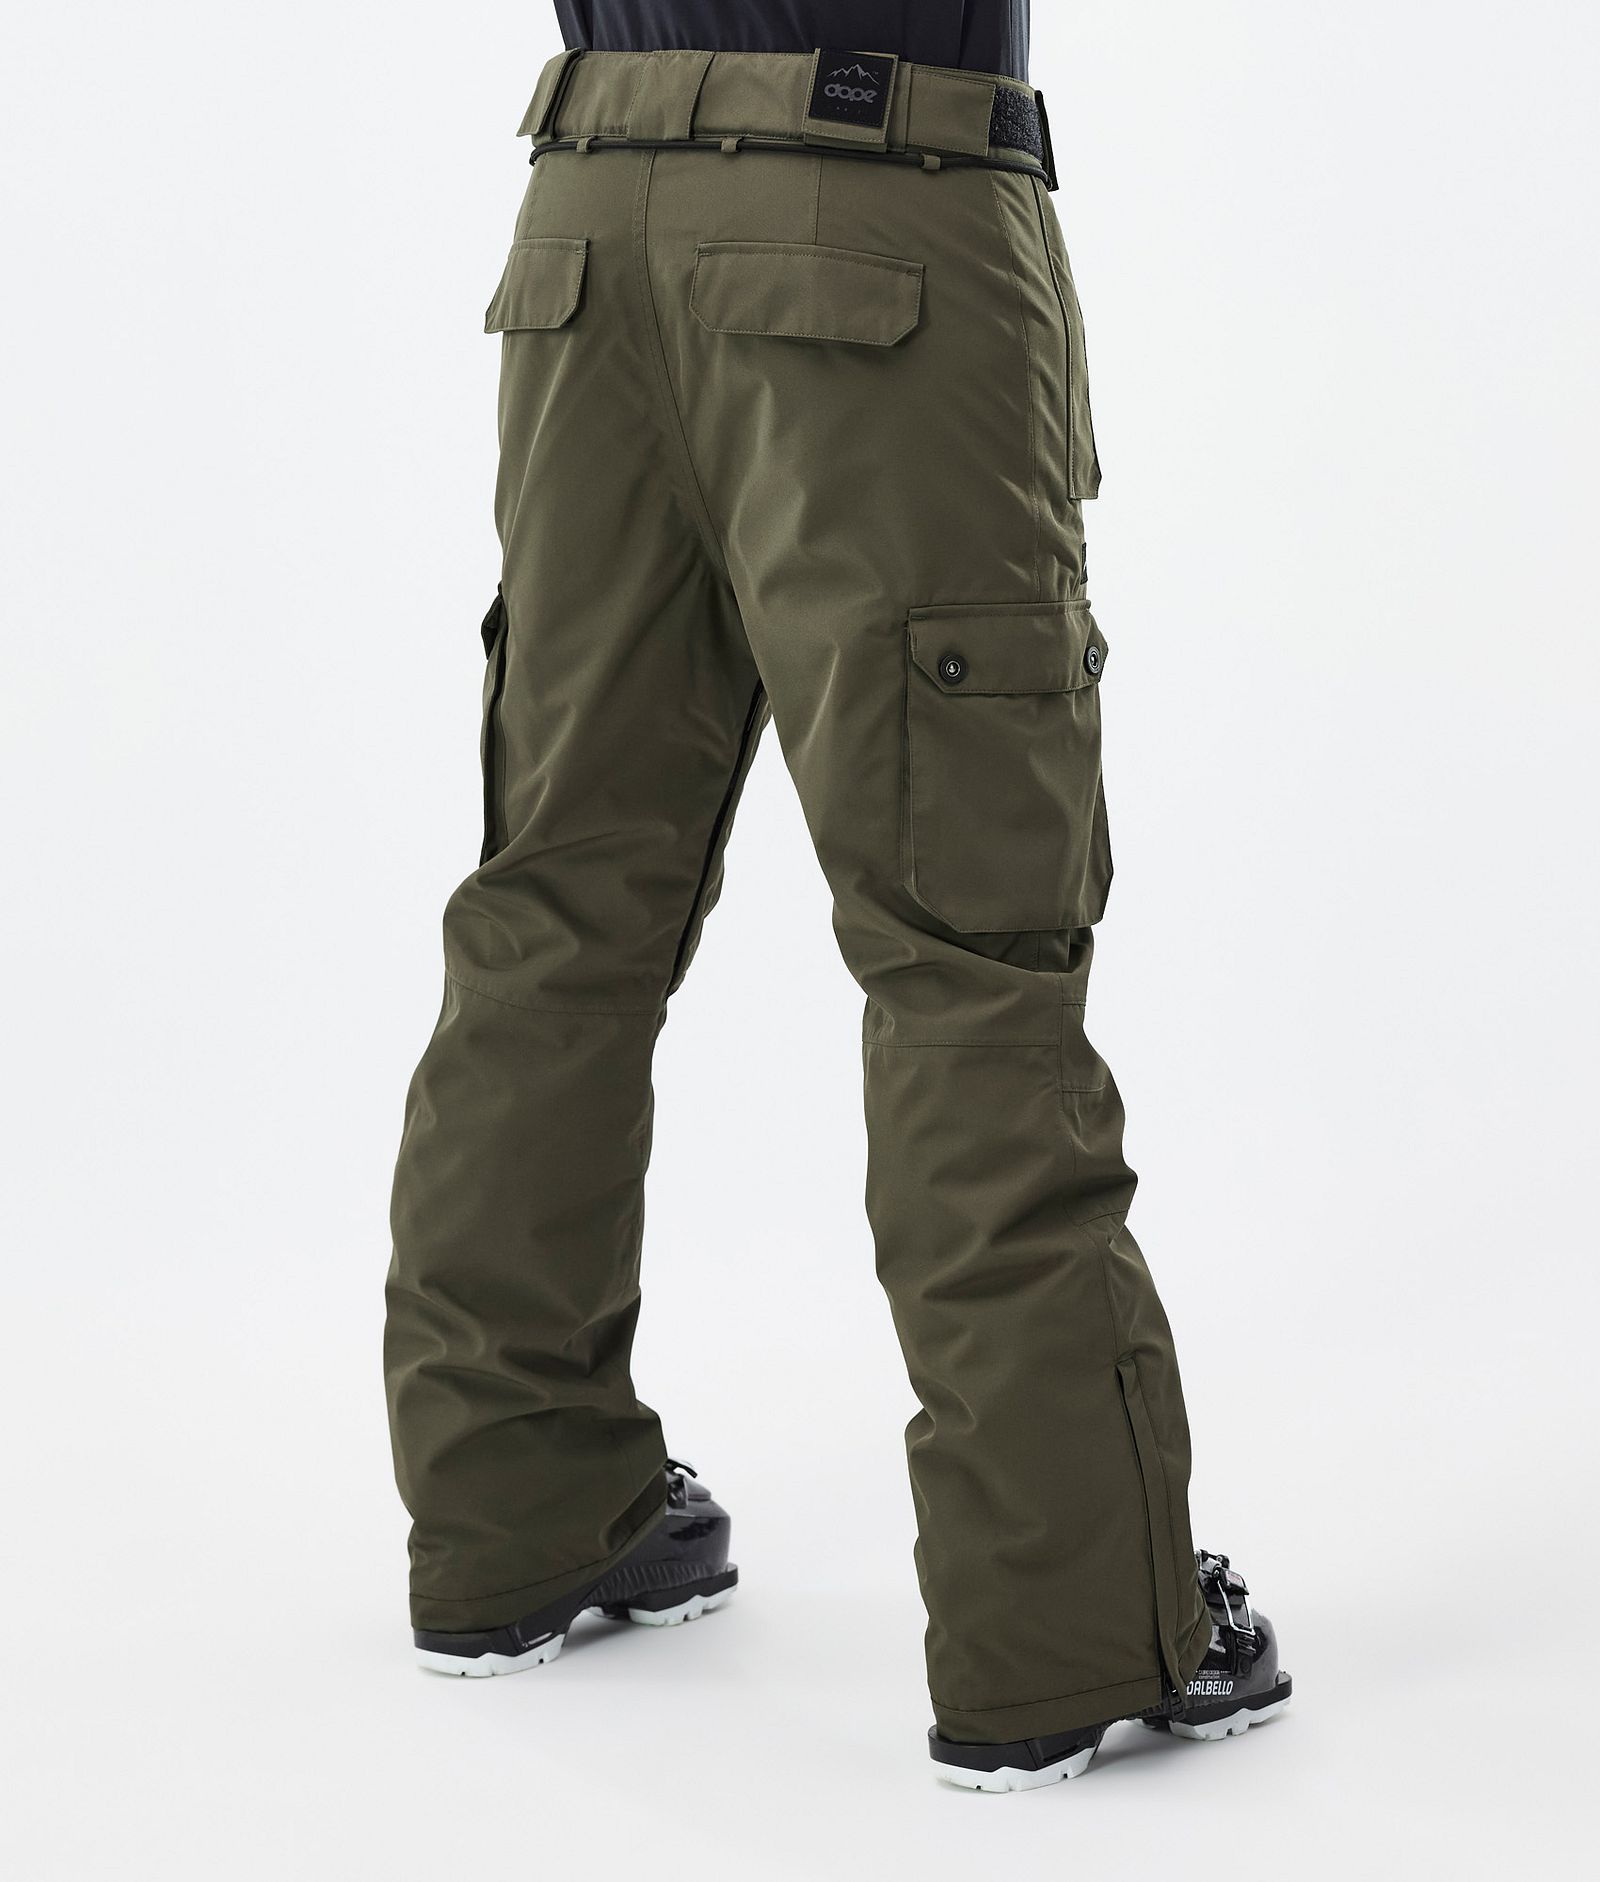 Iconic W Pantalones Esquí Mujer Olive Green